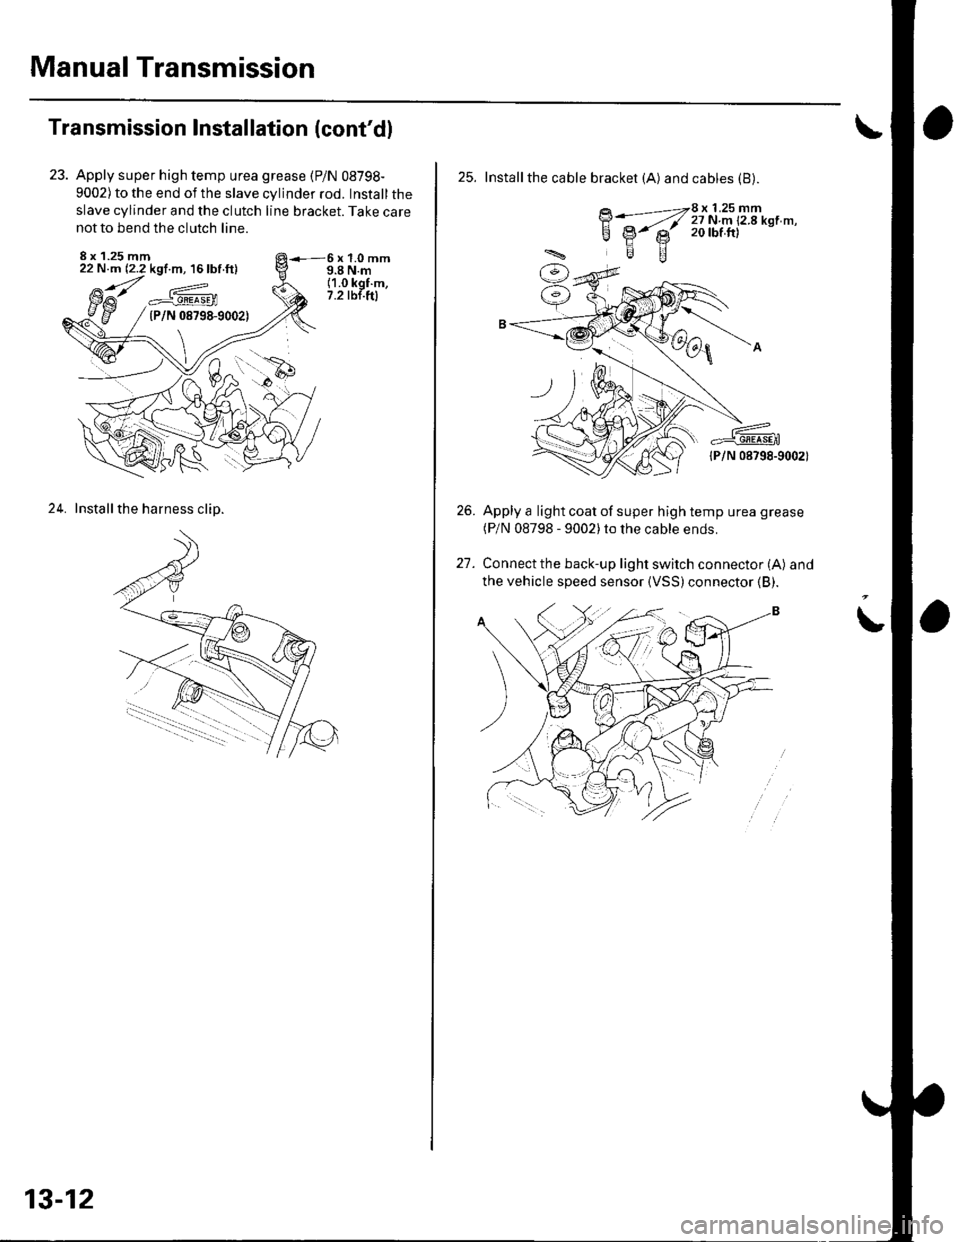 HONDA CIVIC 2002 7.G Owners Guide Manual Transmission
Transmission Installation (contdl
Apply super high temp urea grease (P/N 08798-
9002) to the end of the slave cylinder rod. Install the
slave cylinder and the clutch line bracket.